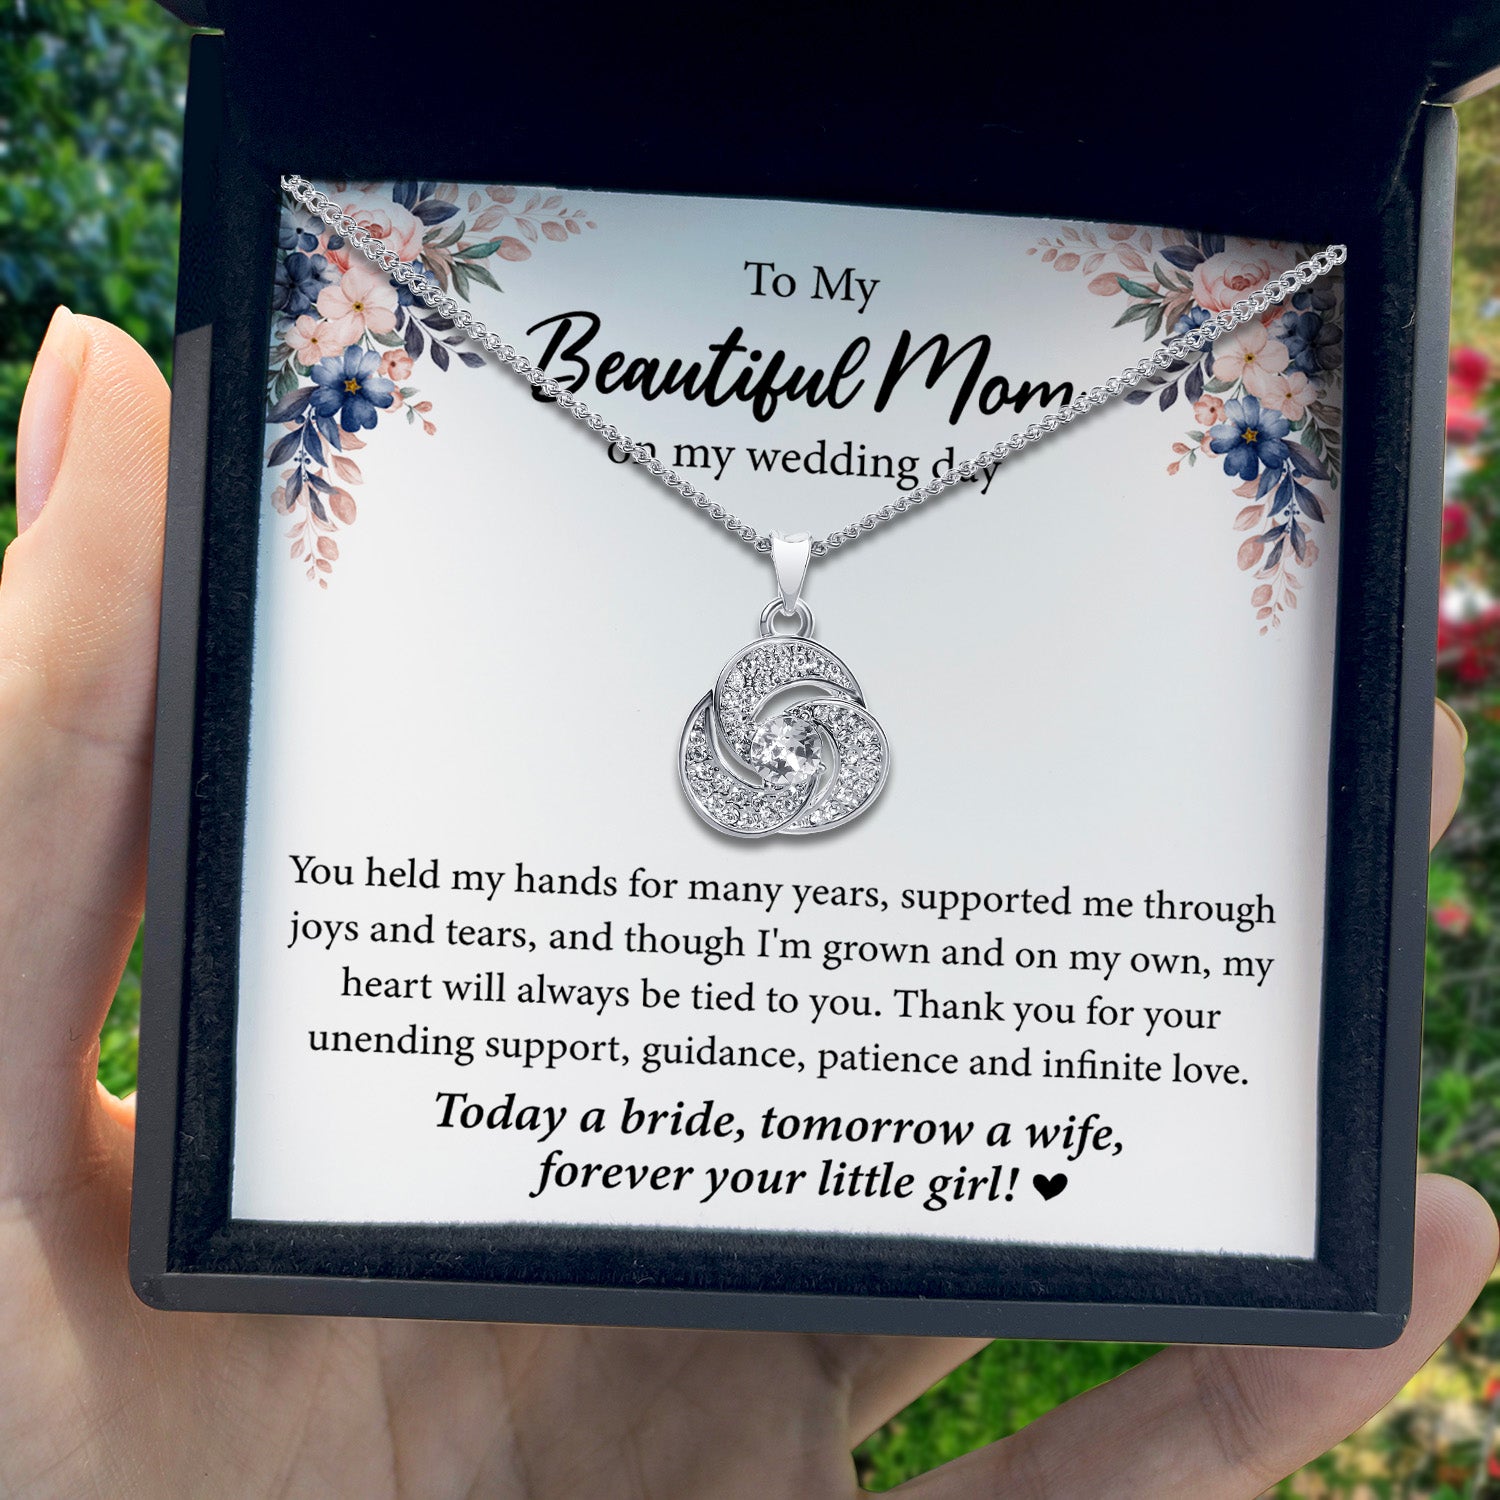 To My Beautiful Mom on My Wedding Day - Tryndi Love Knot Necklace